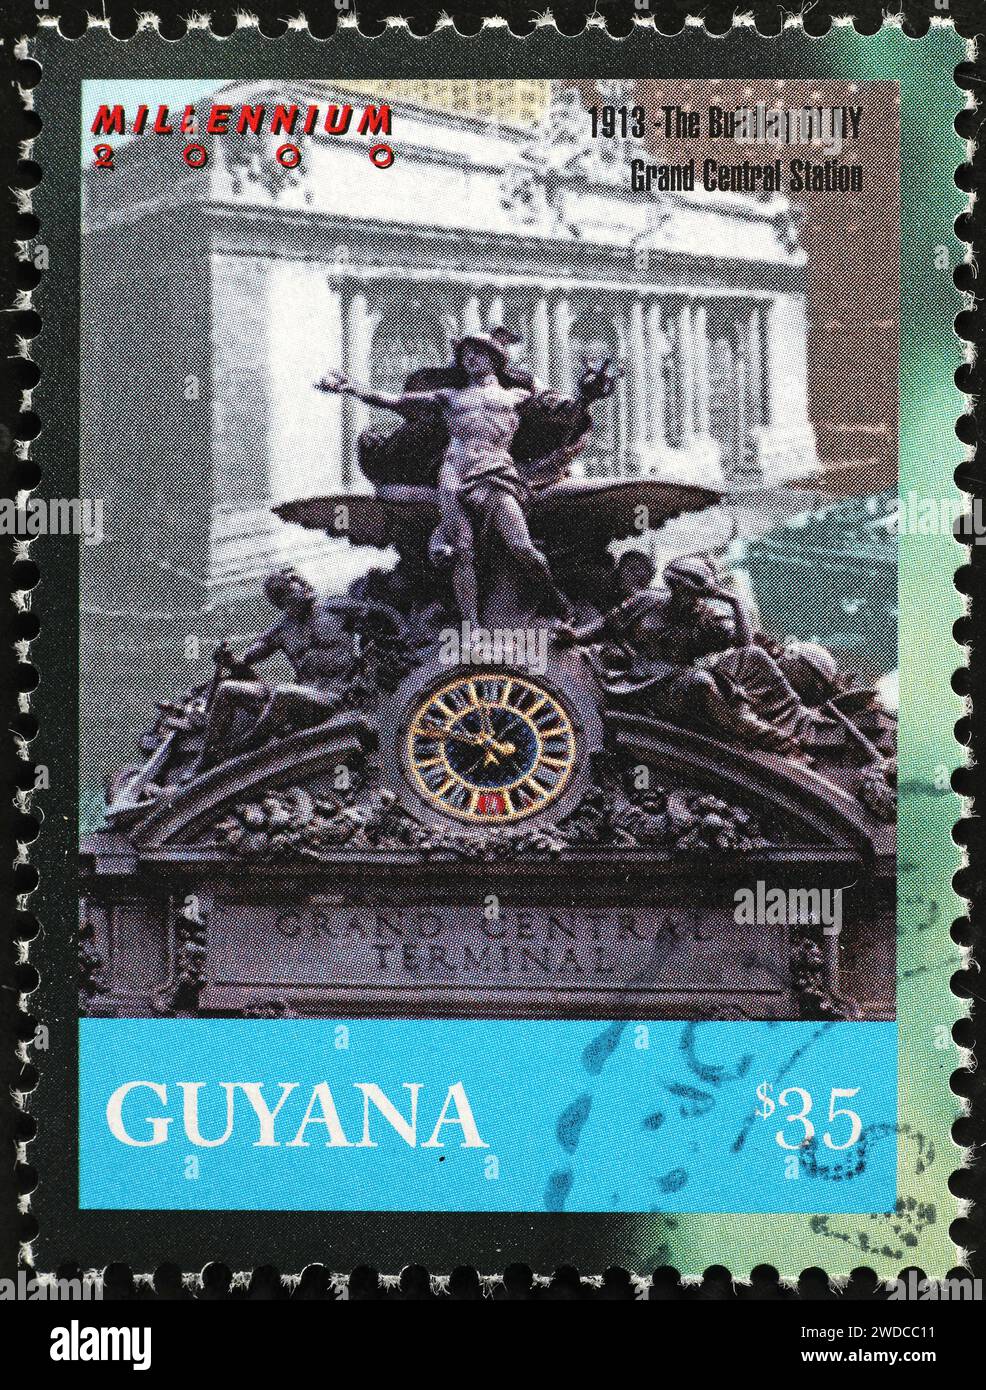 The building of Grand Central Station in NYC celebrated on stamp Stock Photo